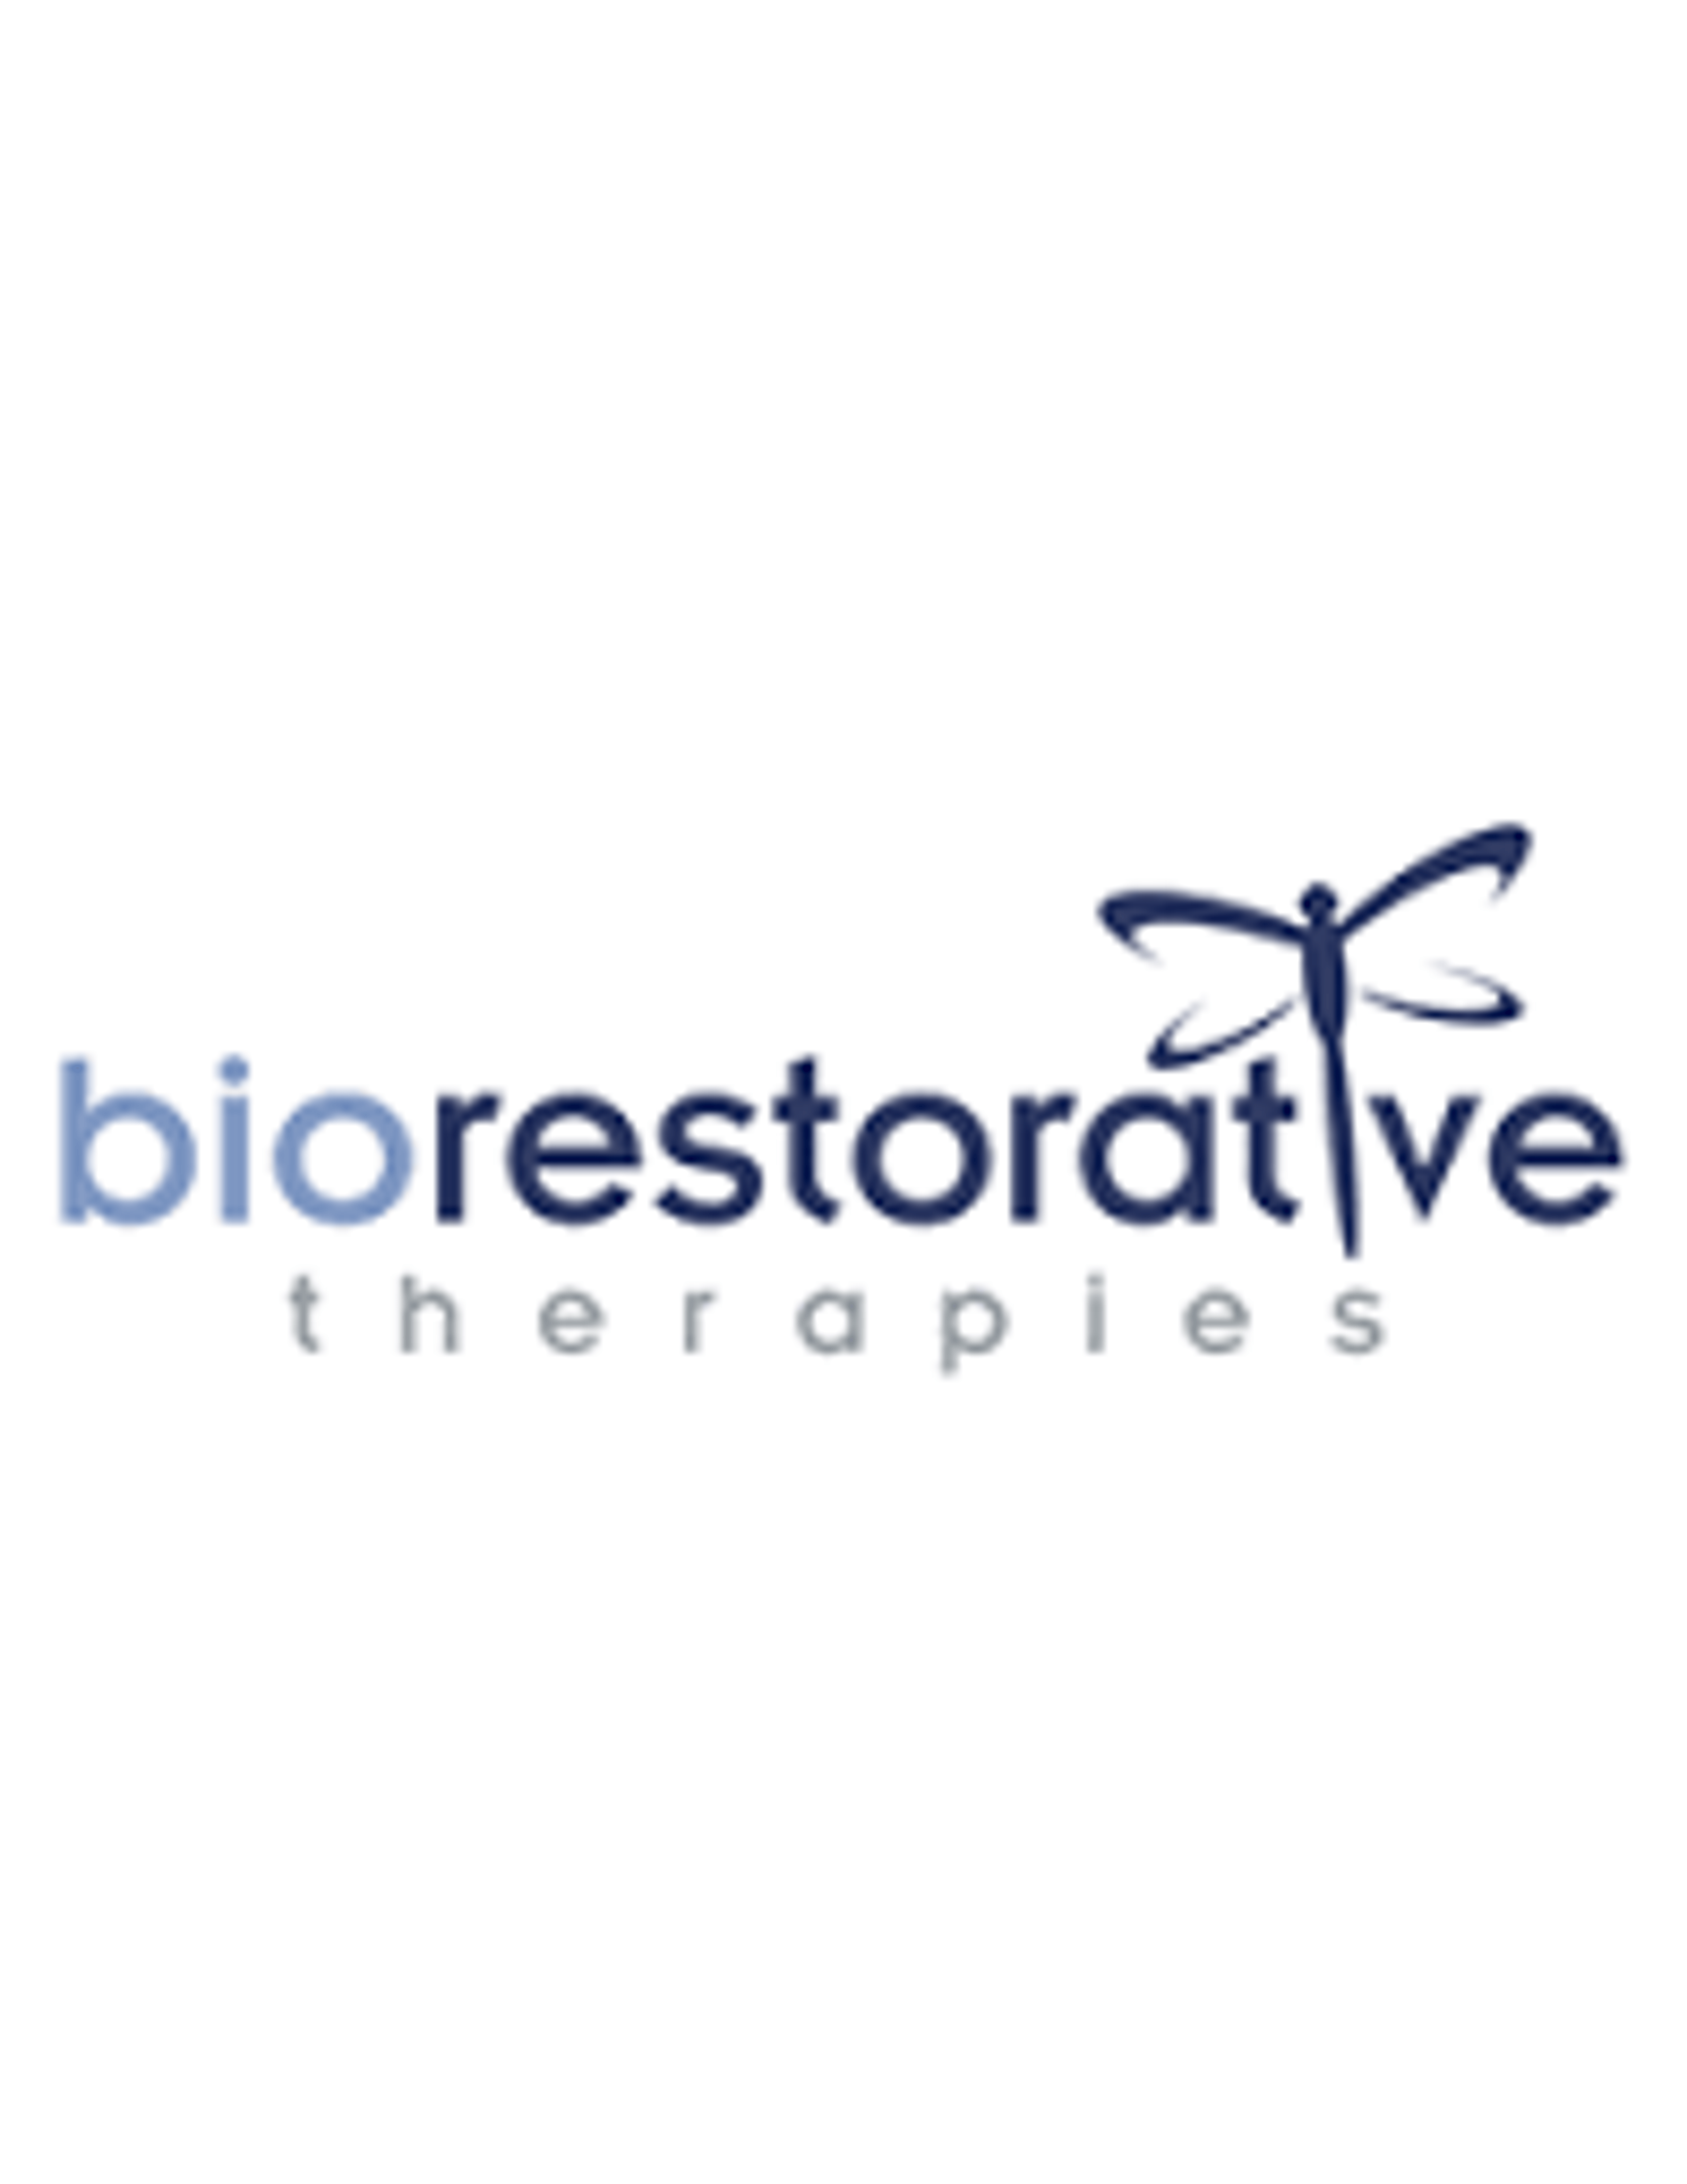 EXCLUSIVE: BioRestorative Selects Second Site For Its Lumbar Disc Disease Study